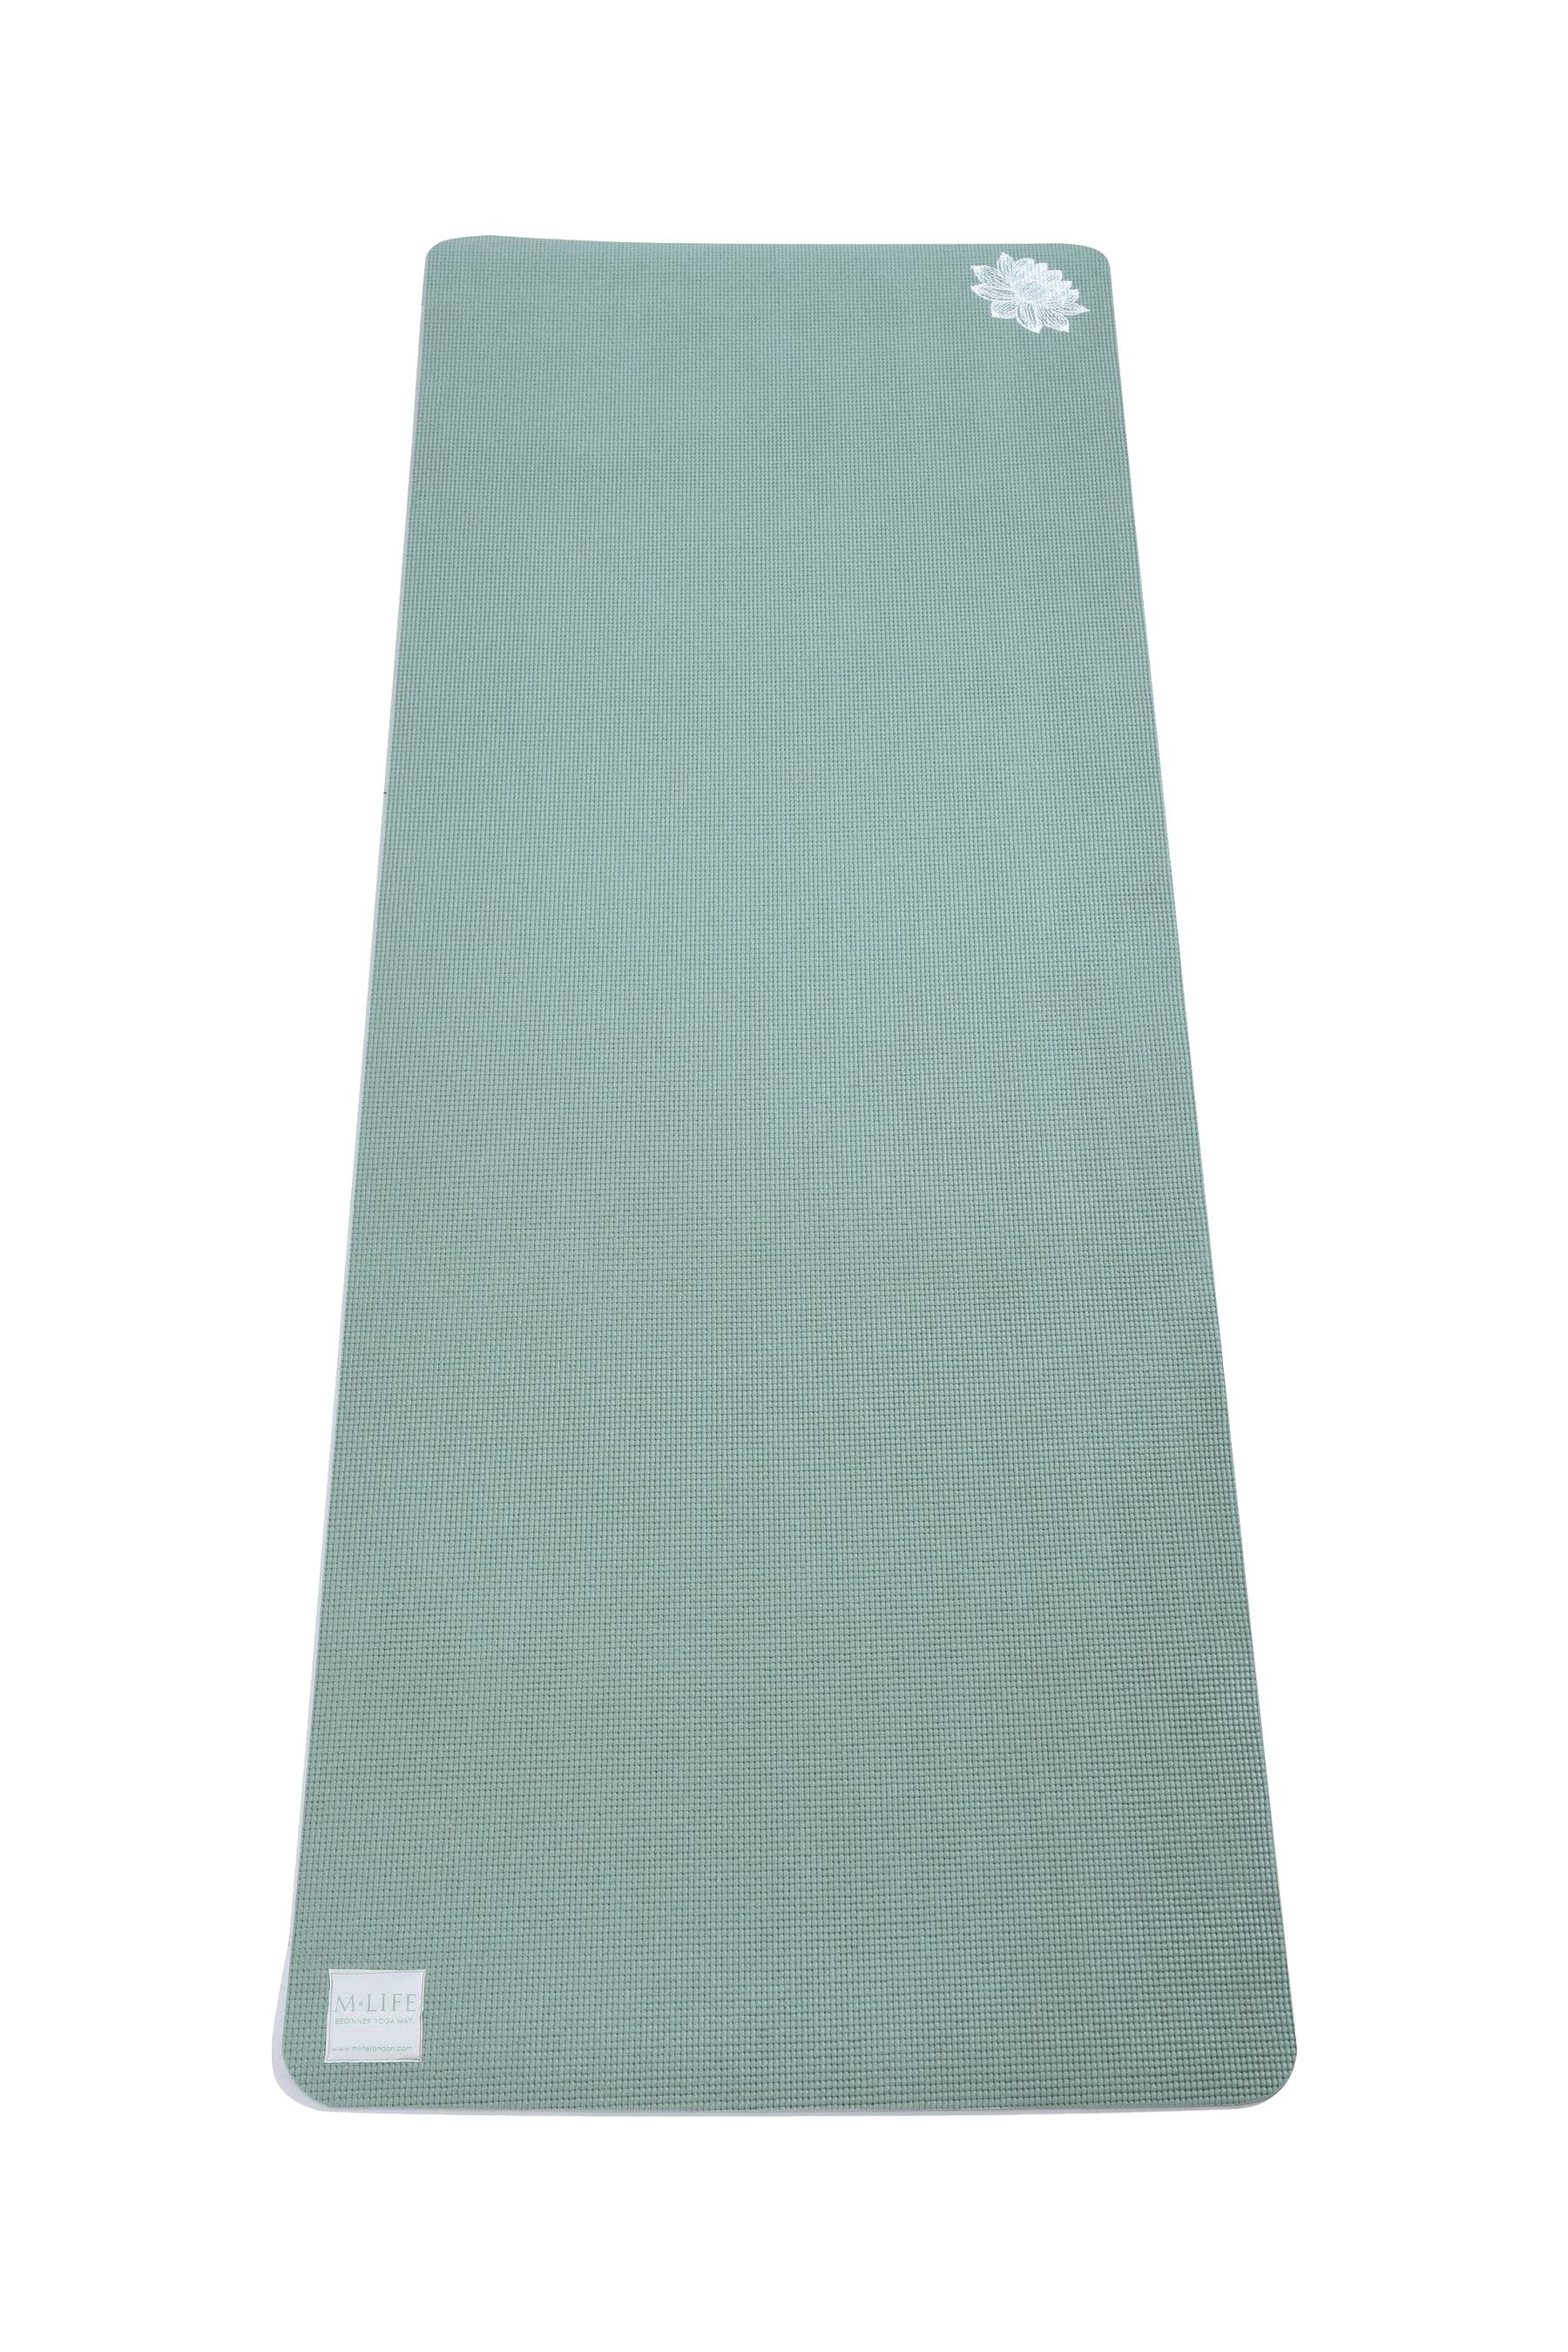 Buy M.Life Beginners Yoga Mat 4mm from the Next UK online shop